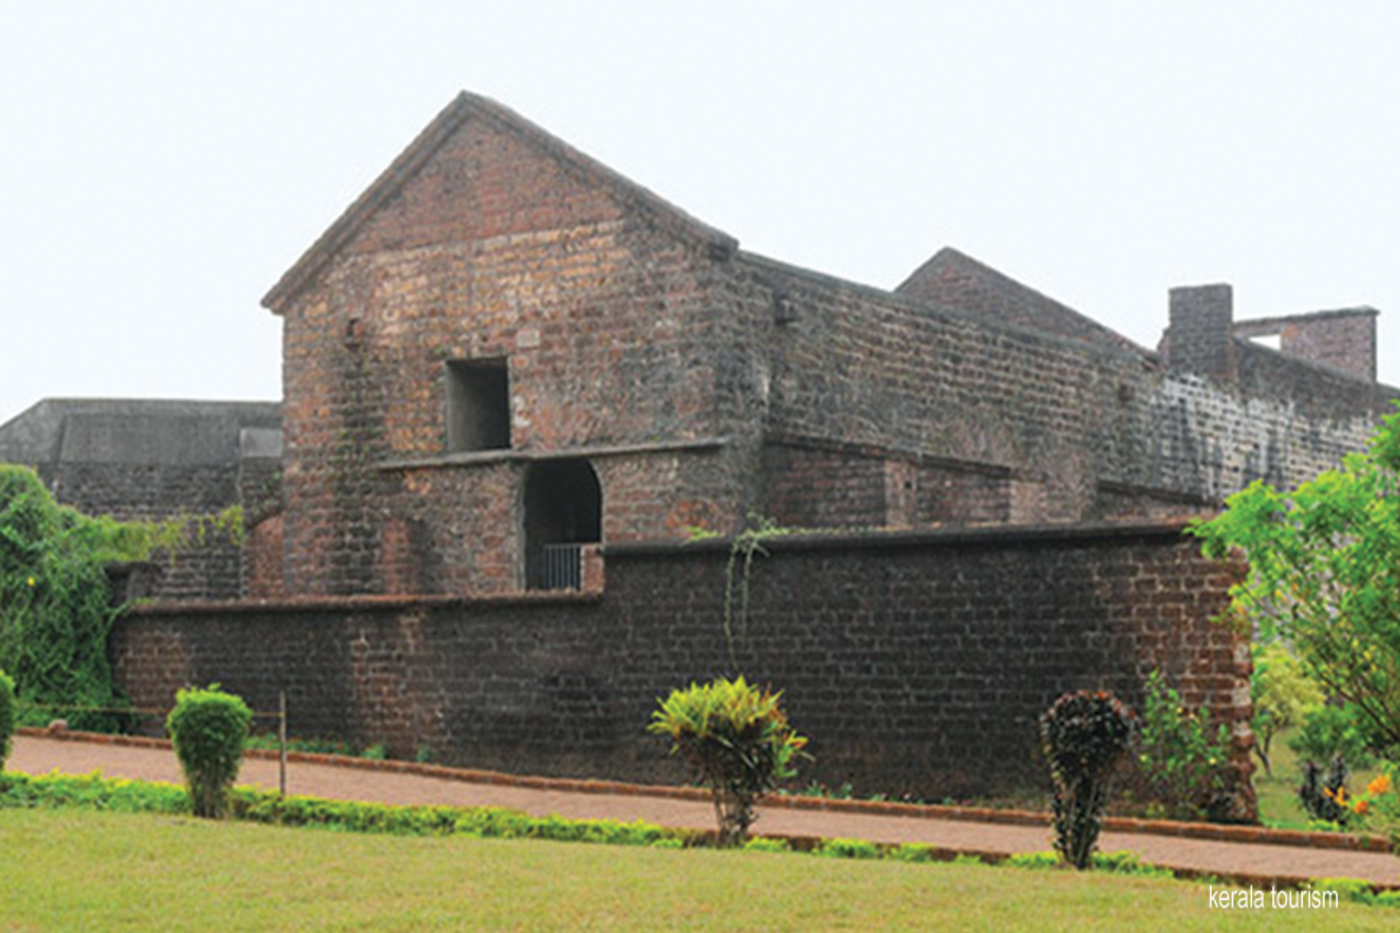 ST ANGELO FORT